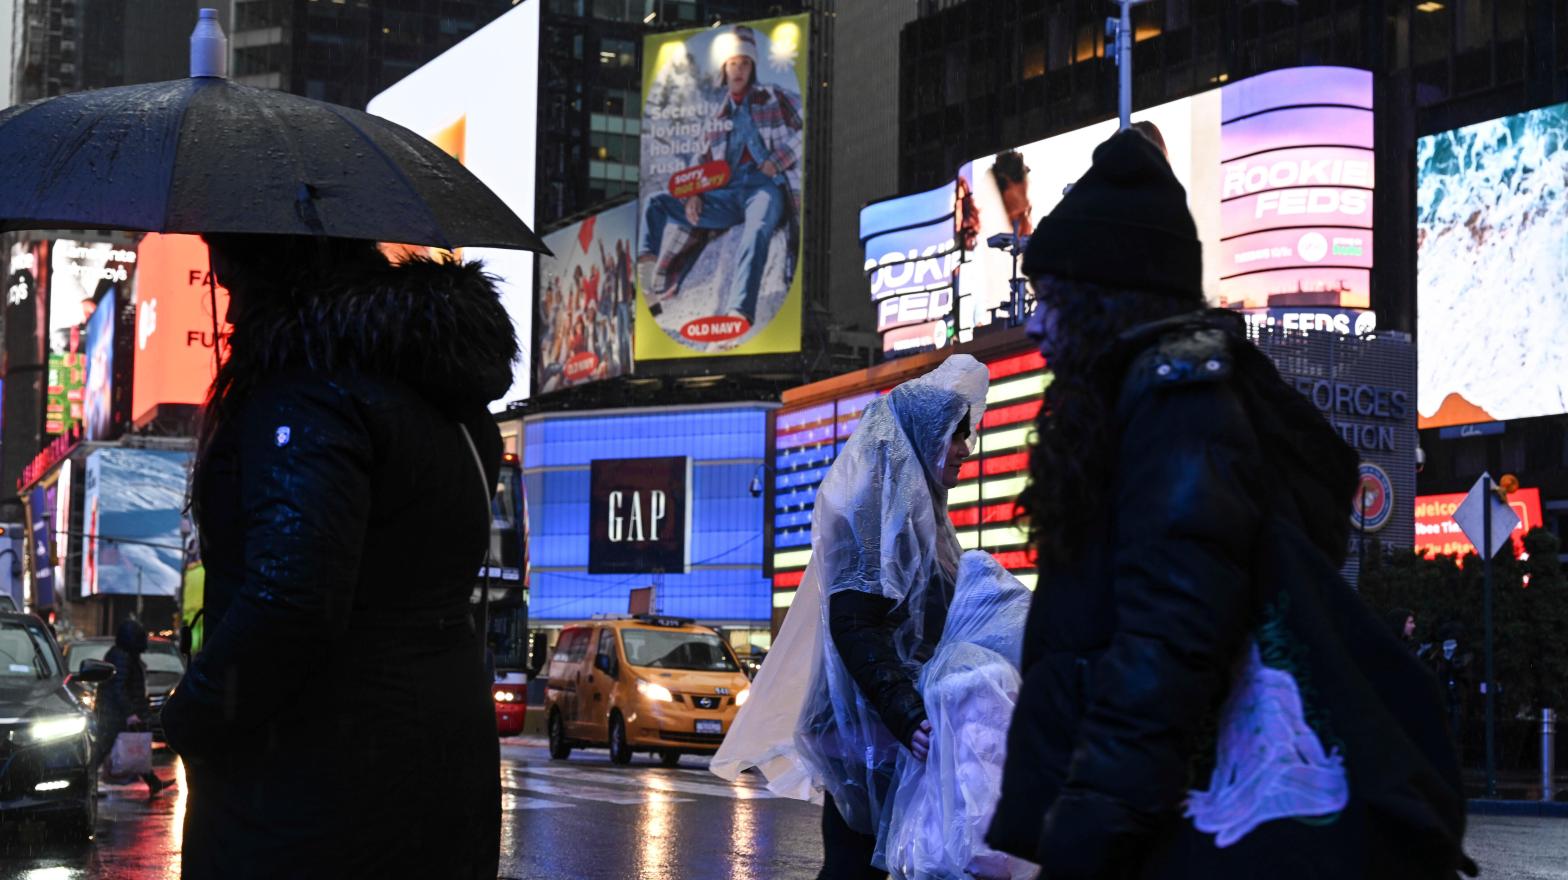 People walk in the rain in Times Square late last month.  (Photo: NDZ/STAR MAX/IPx, AP)